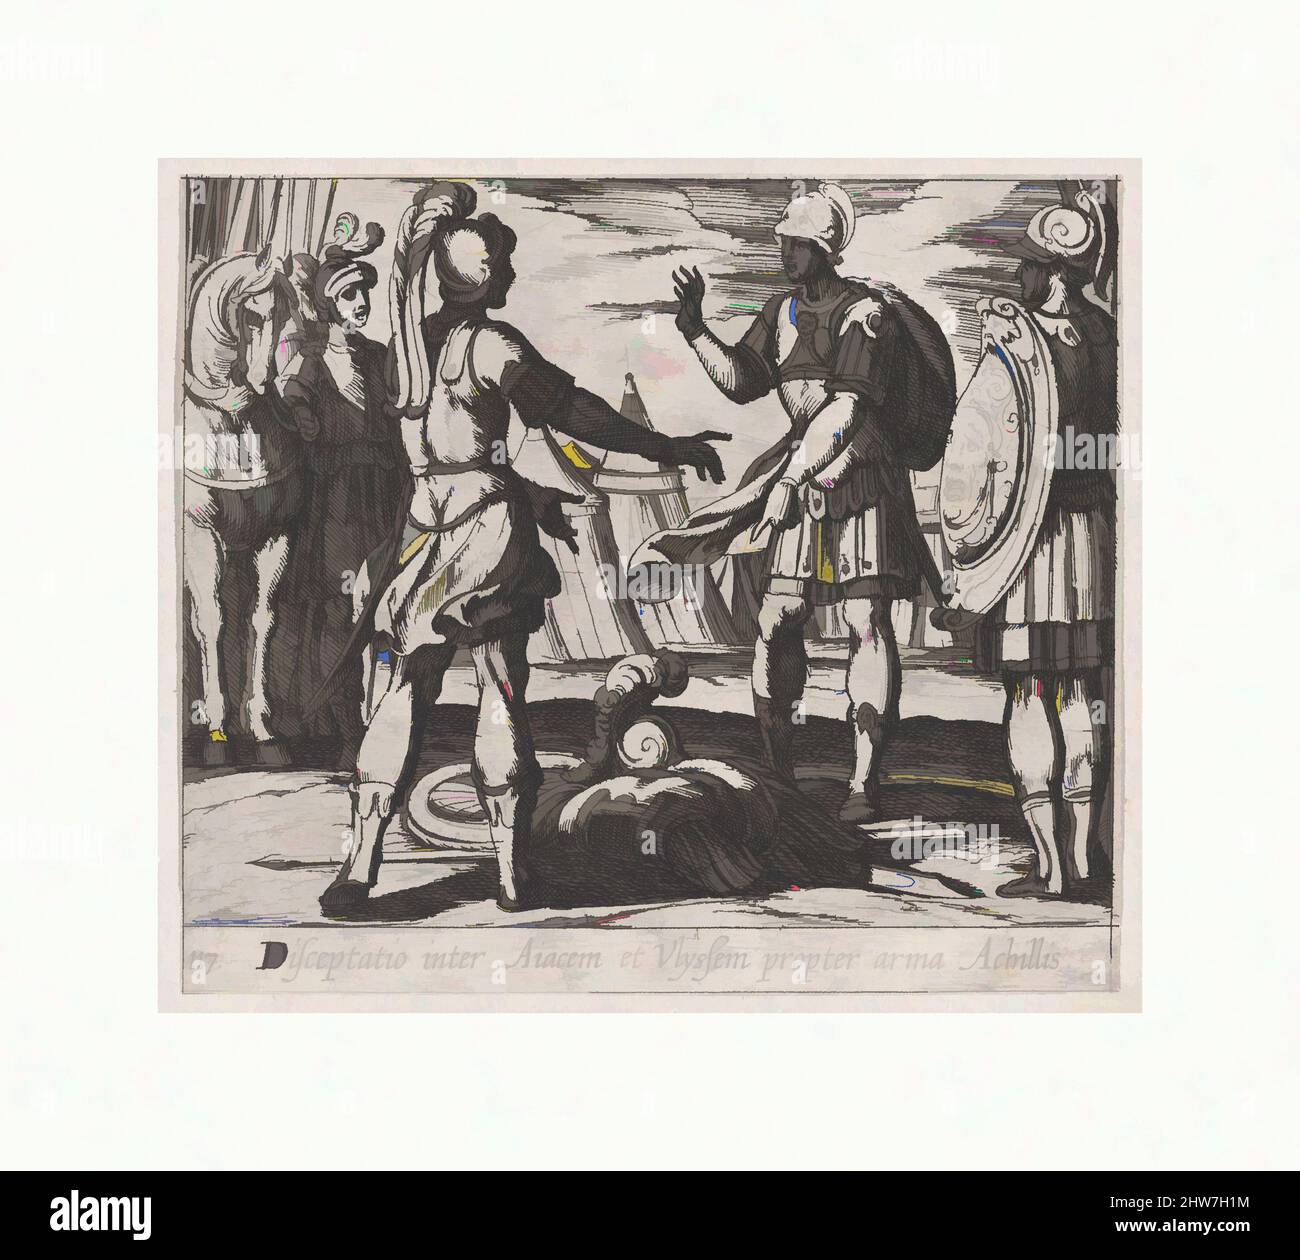 Art inspired by Plate 117: The Dispute over Achilles' Armor (Disceptatio inter Aiacem et Ulyssem propter arma Achillis), from Ovid's 'Metamorphoses', 1606, Etching, Sheet: 4 in. × 4 9/16 in. (10.2 × 11.6 cm), Prints, Antonio Tempesta (Italian, Florence 1555–1630 Rome, Classic works modernized by Artotop with a splash of modernity. Shapes, color and value, eye-catching visual impact on art. Emotions through freedom of artworks in a contemporary way. A timeless message pursuing a wildly creative new direction. Artists turning to the digital medium and creating the Artotop NFT Stock Photo